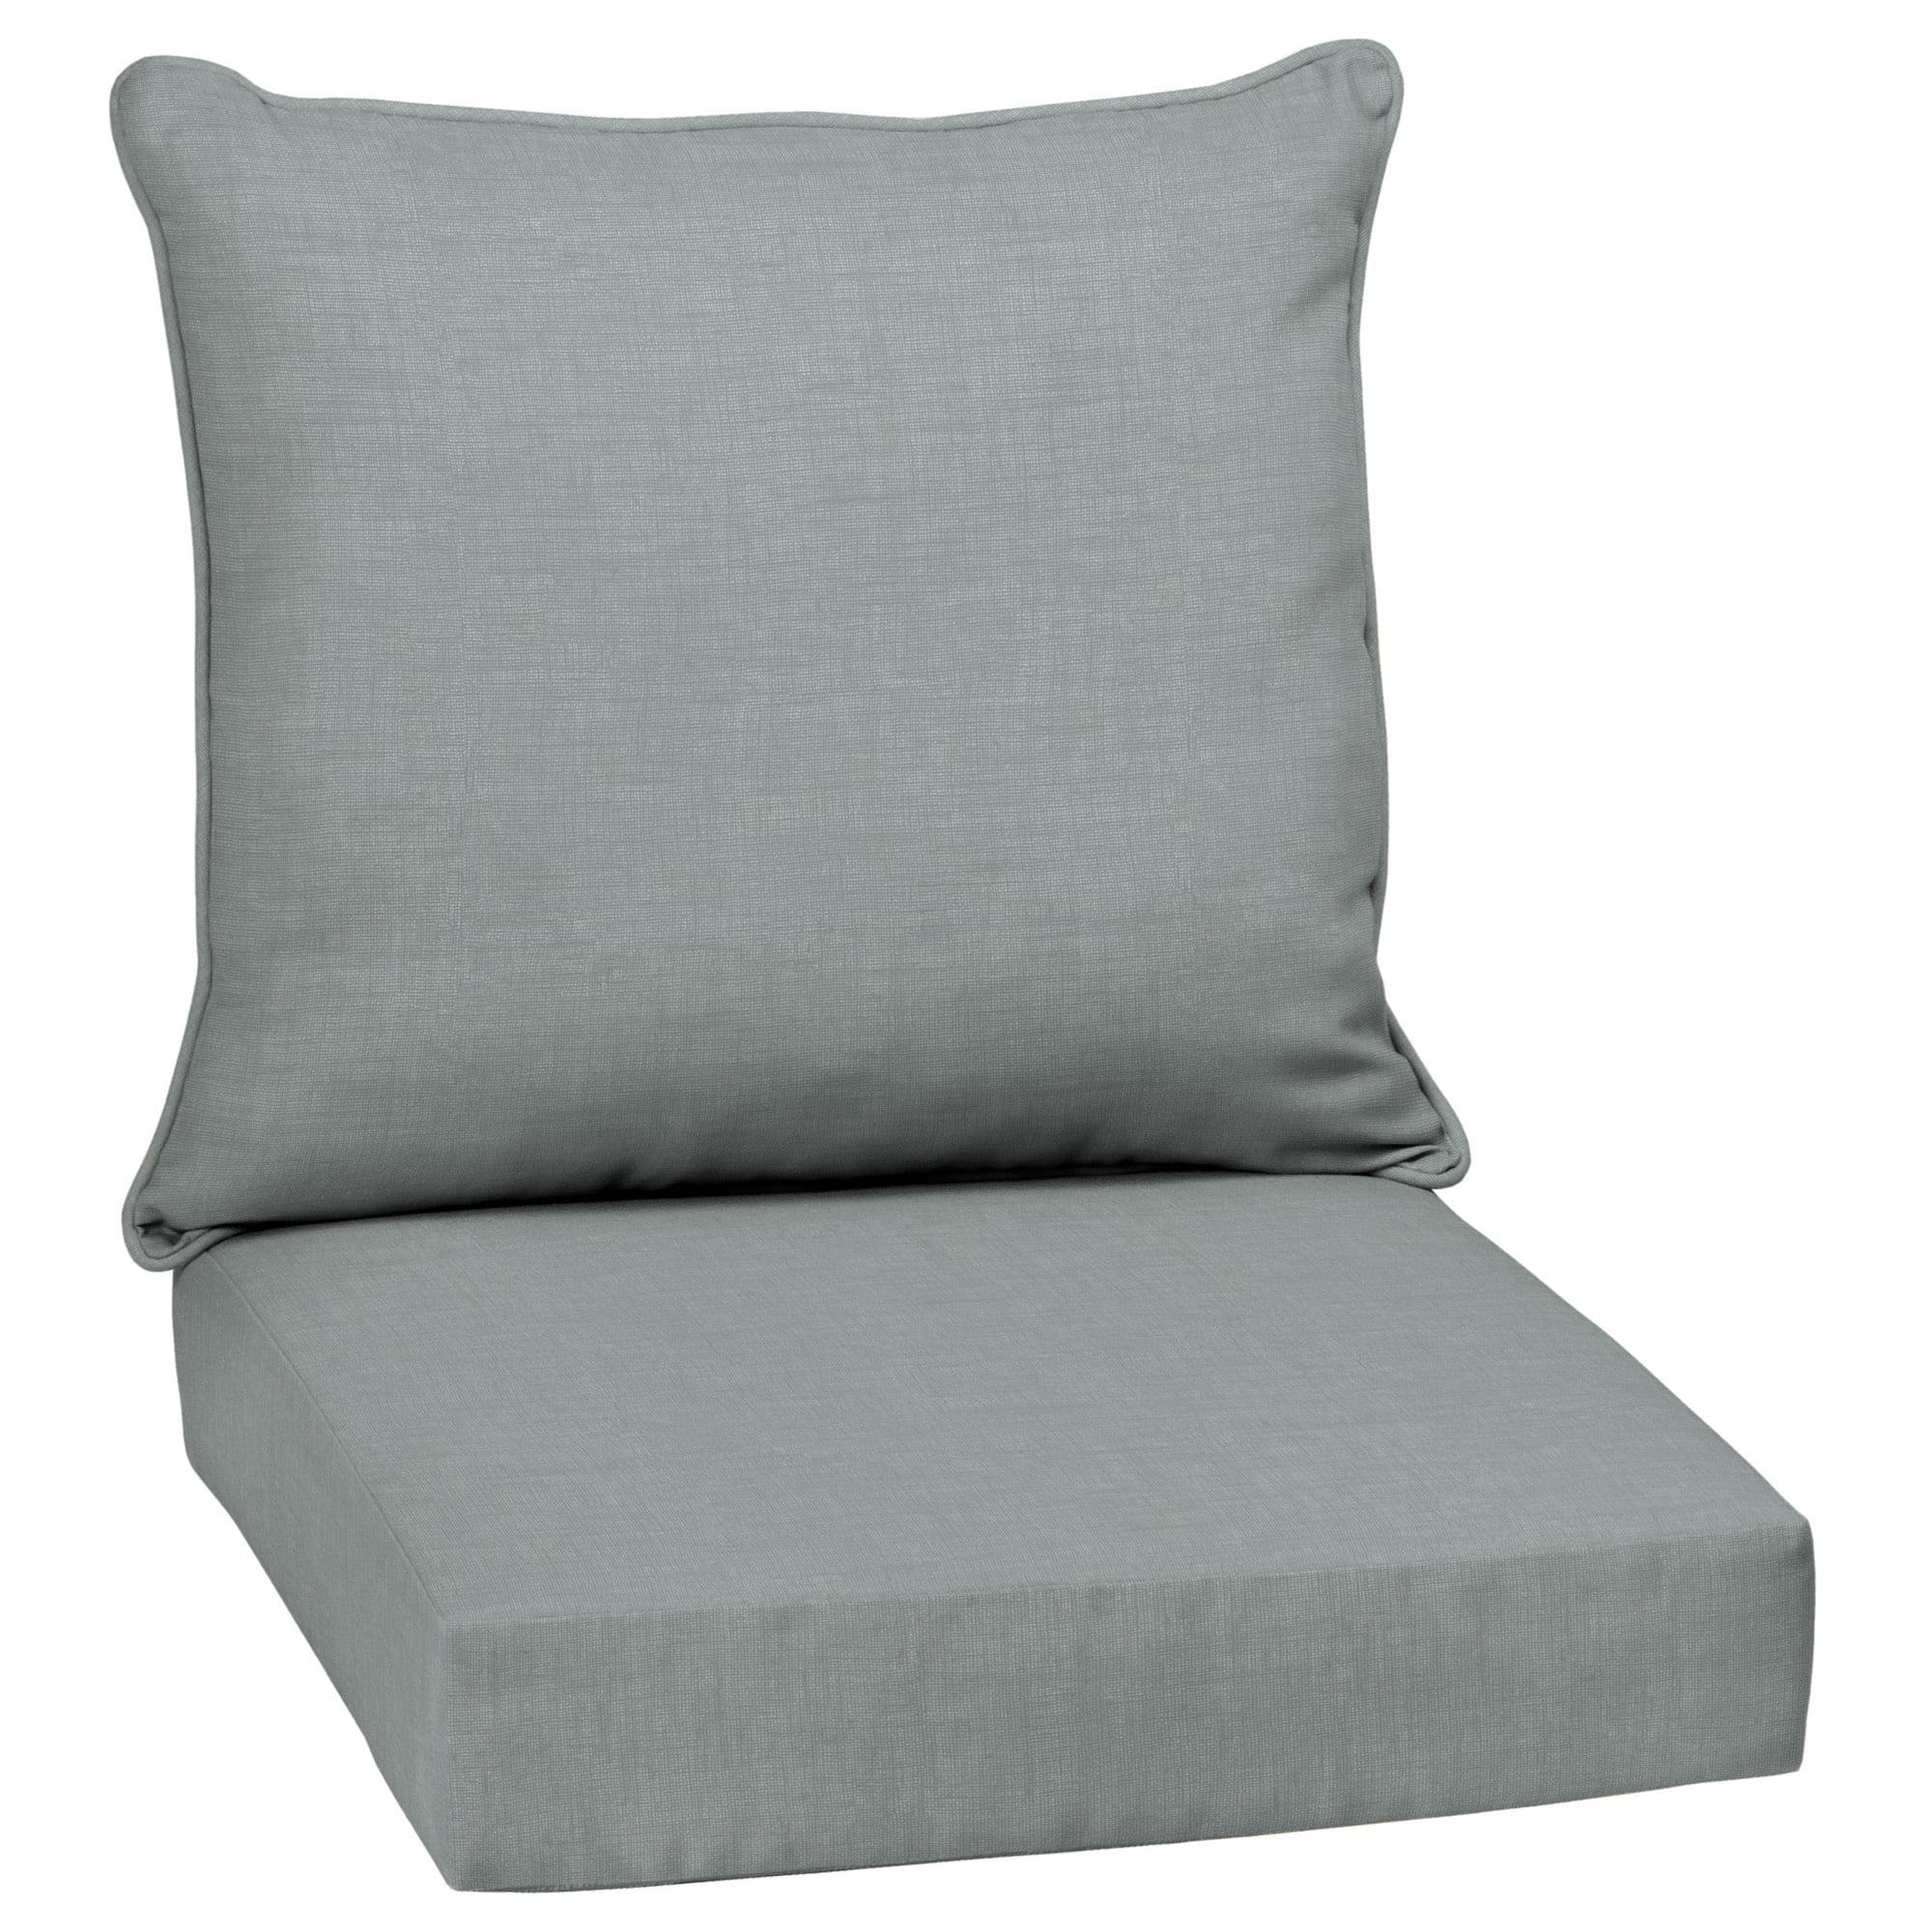 White 24”x24”x6” Deep Seat Back Rest Cushion Pillow Outdoor Polyester 